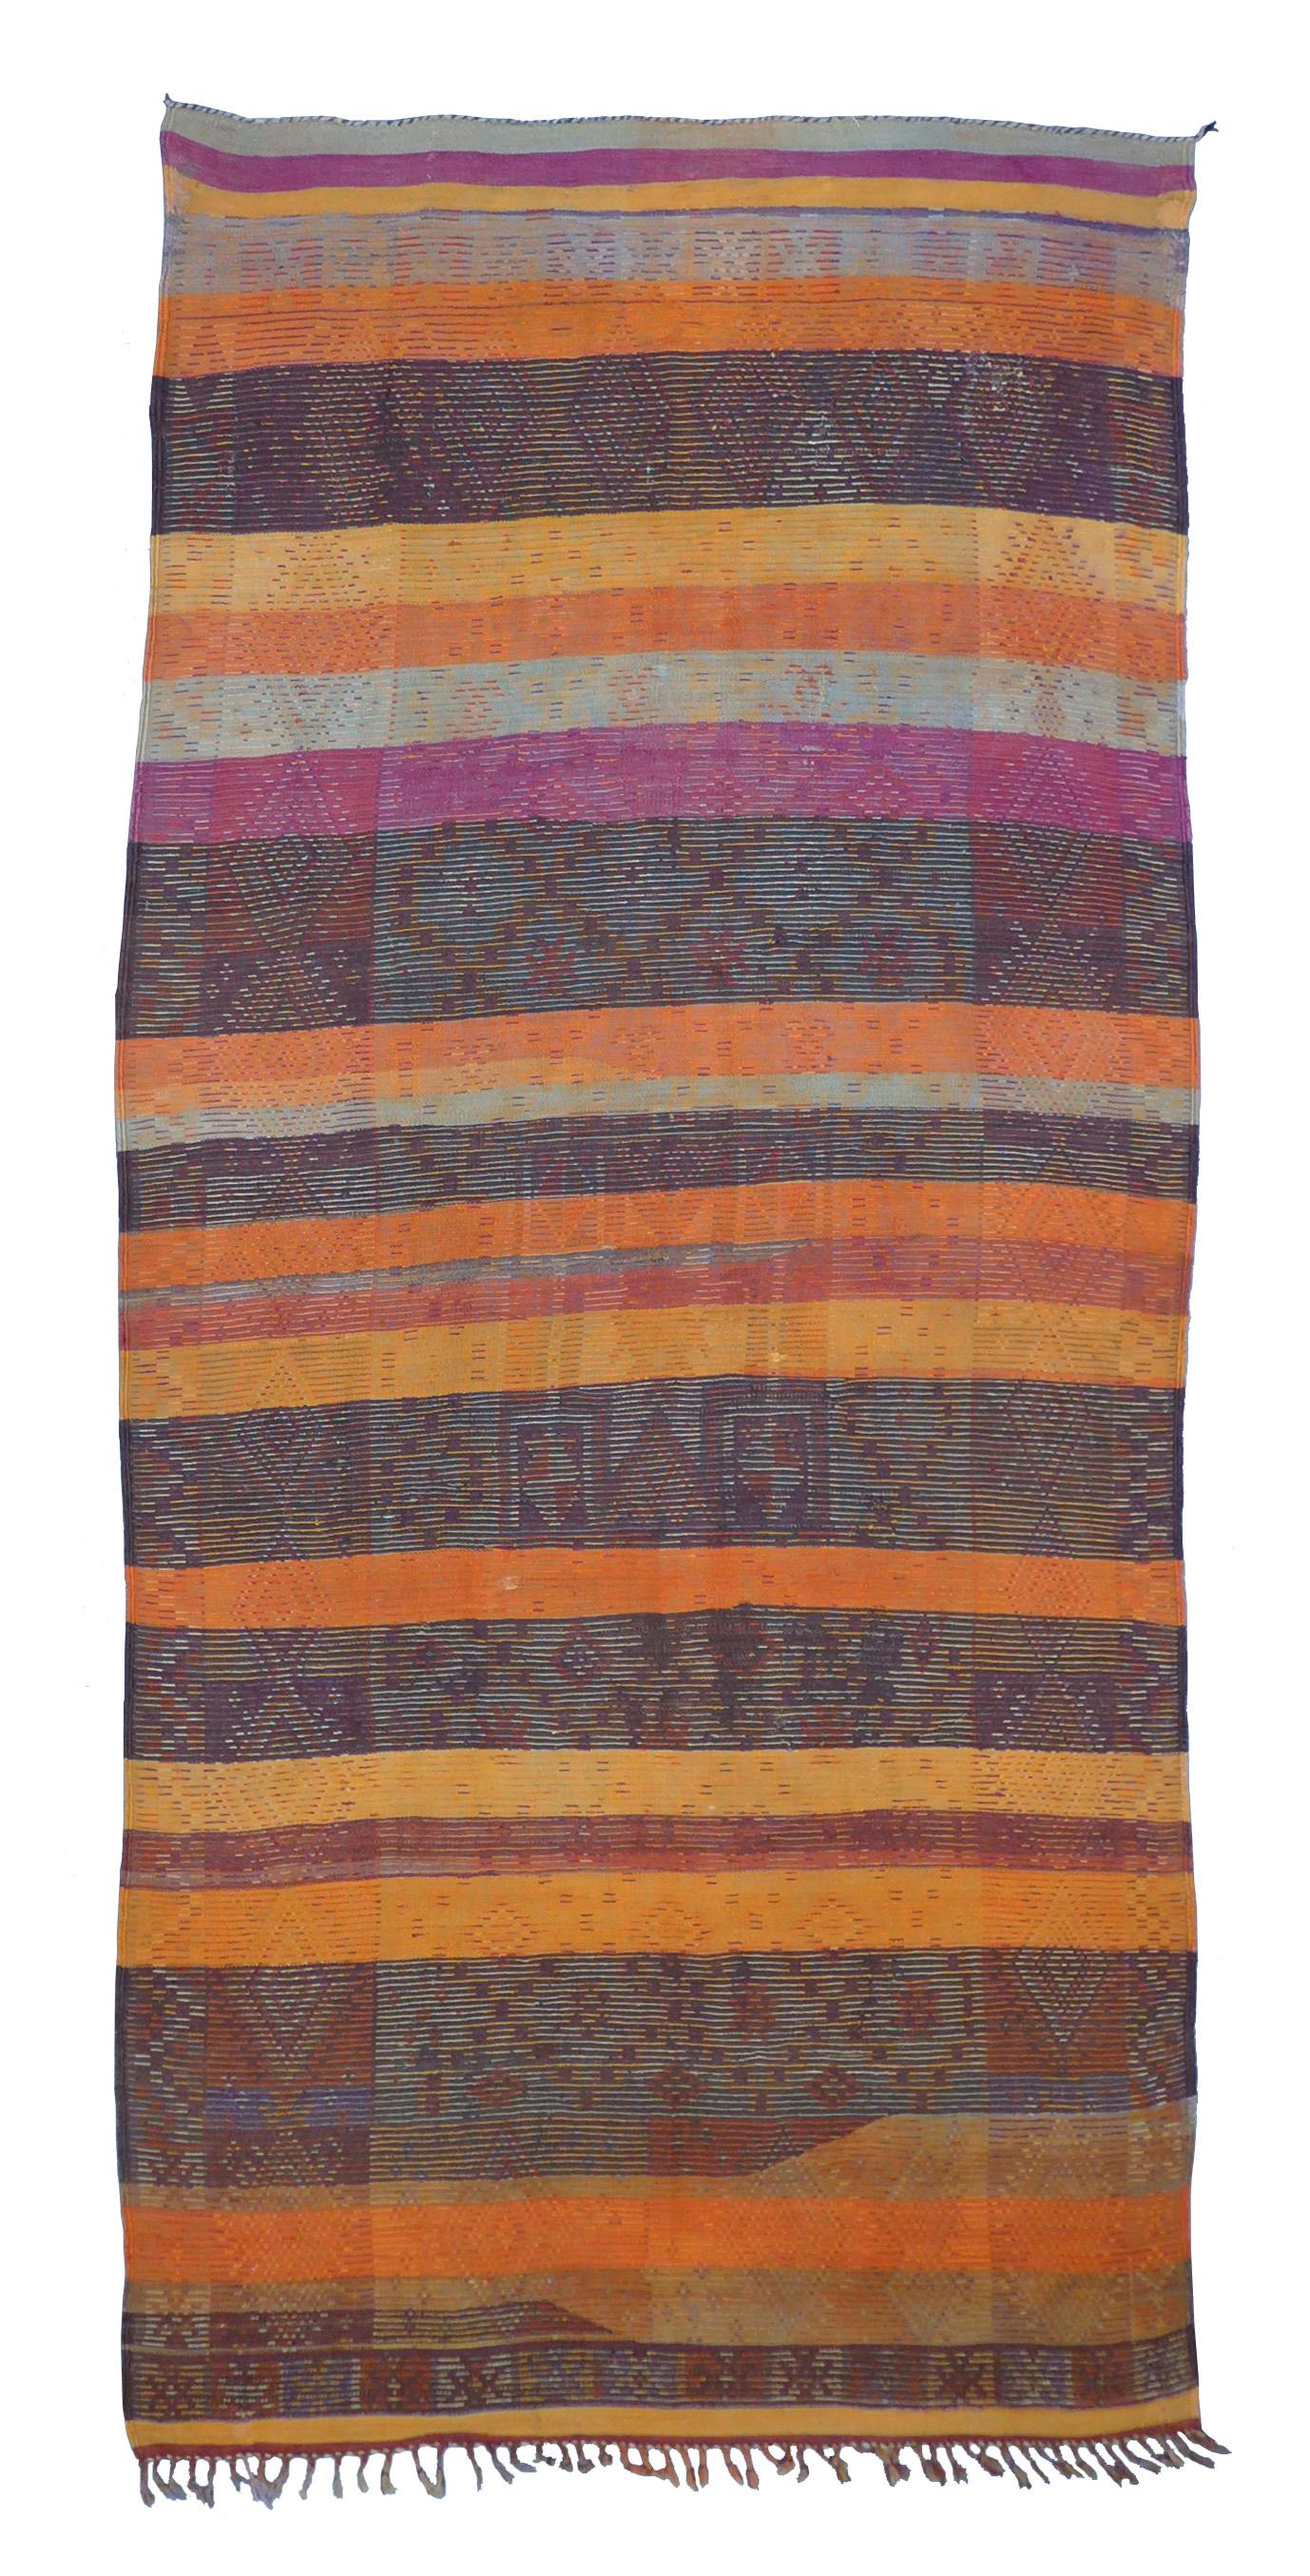 This is an exceptional vintage Znaga tribal flat-weave rug emblazoned with a field of earth tones and hand knotted motifs in brown, rust, orange, purple, olive, and red. There are a number of small repairs that match the original premium quality of